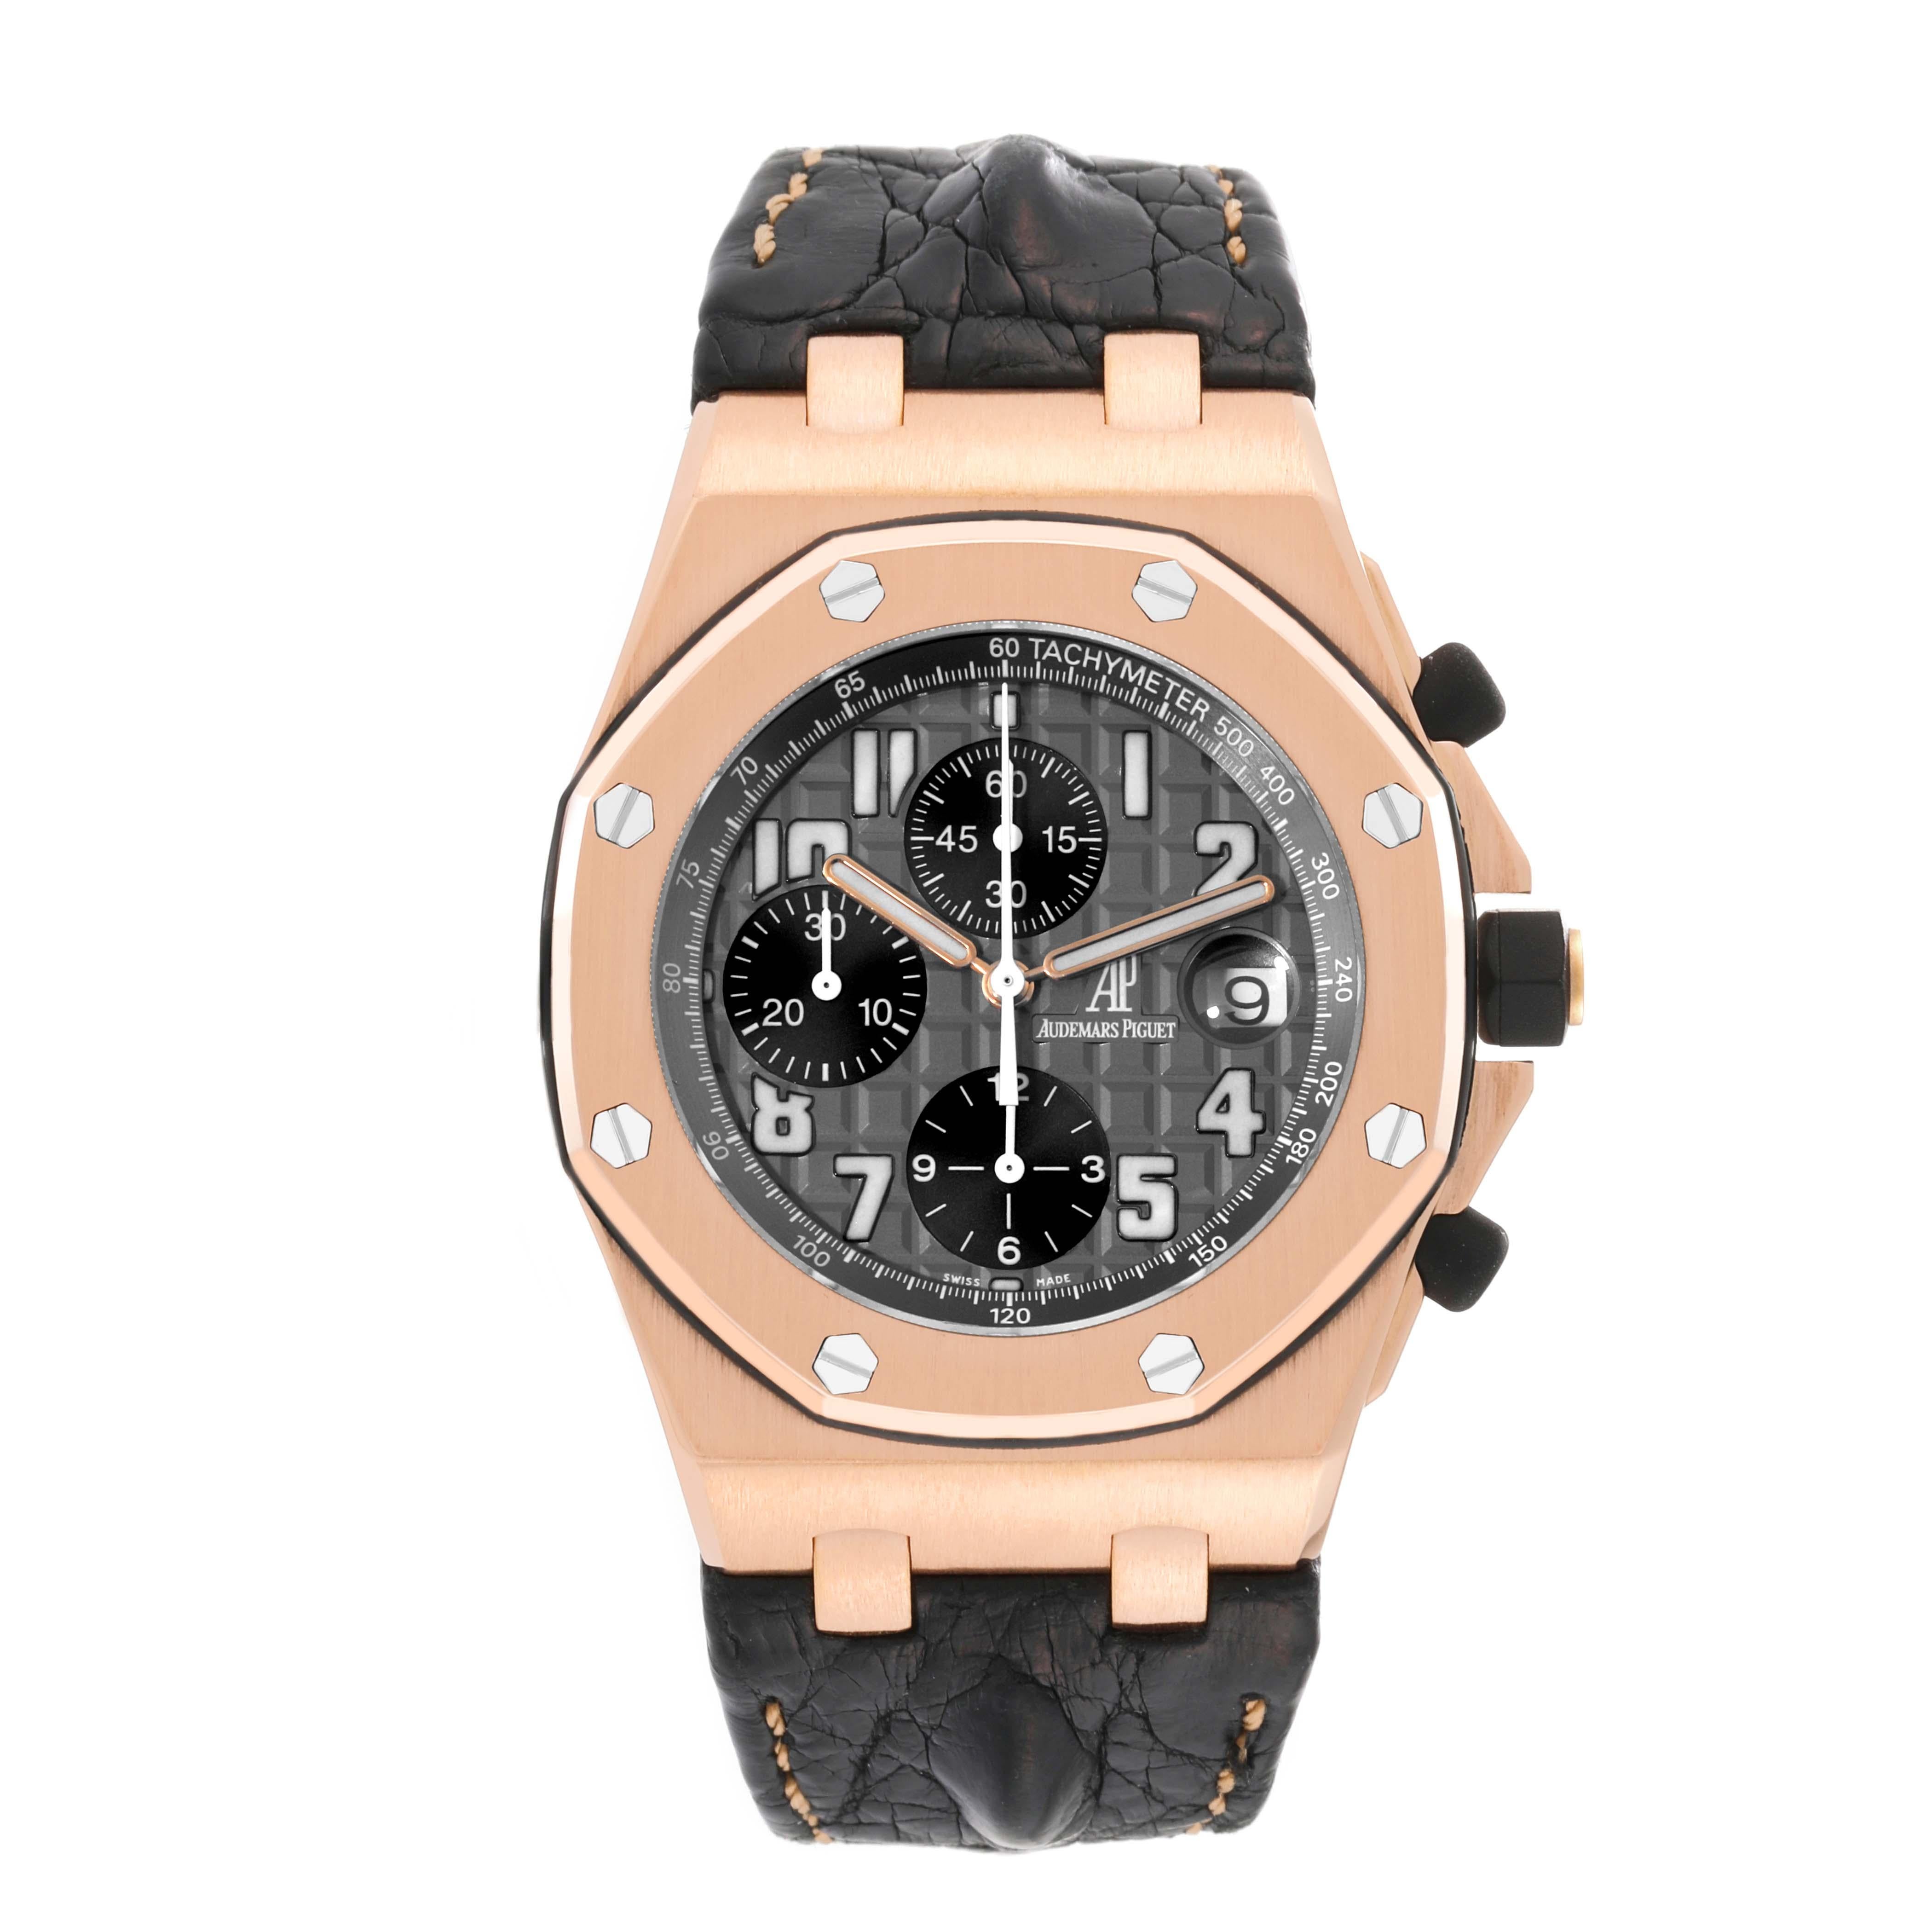 Audemars Piguet Royal Oak Offshore Rose Gold Chronograph Mens Watch 2590OK. Automatic self-winding movement. 18k rose gold octagonal case 42 mm in diameter. Case thickness: 14.2 mm. 18k rose gold bezel punctuated with 8 signature screws. Scratch